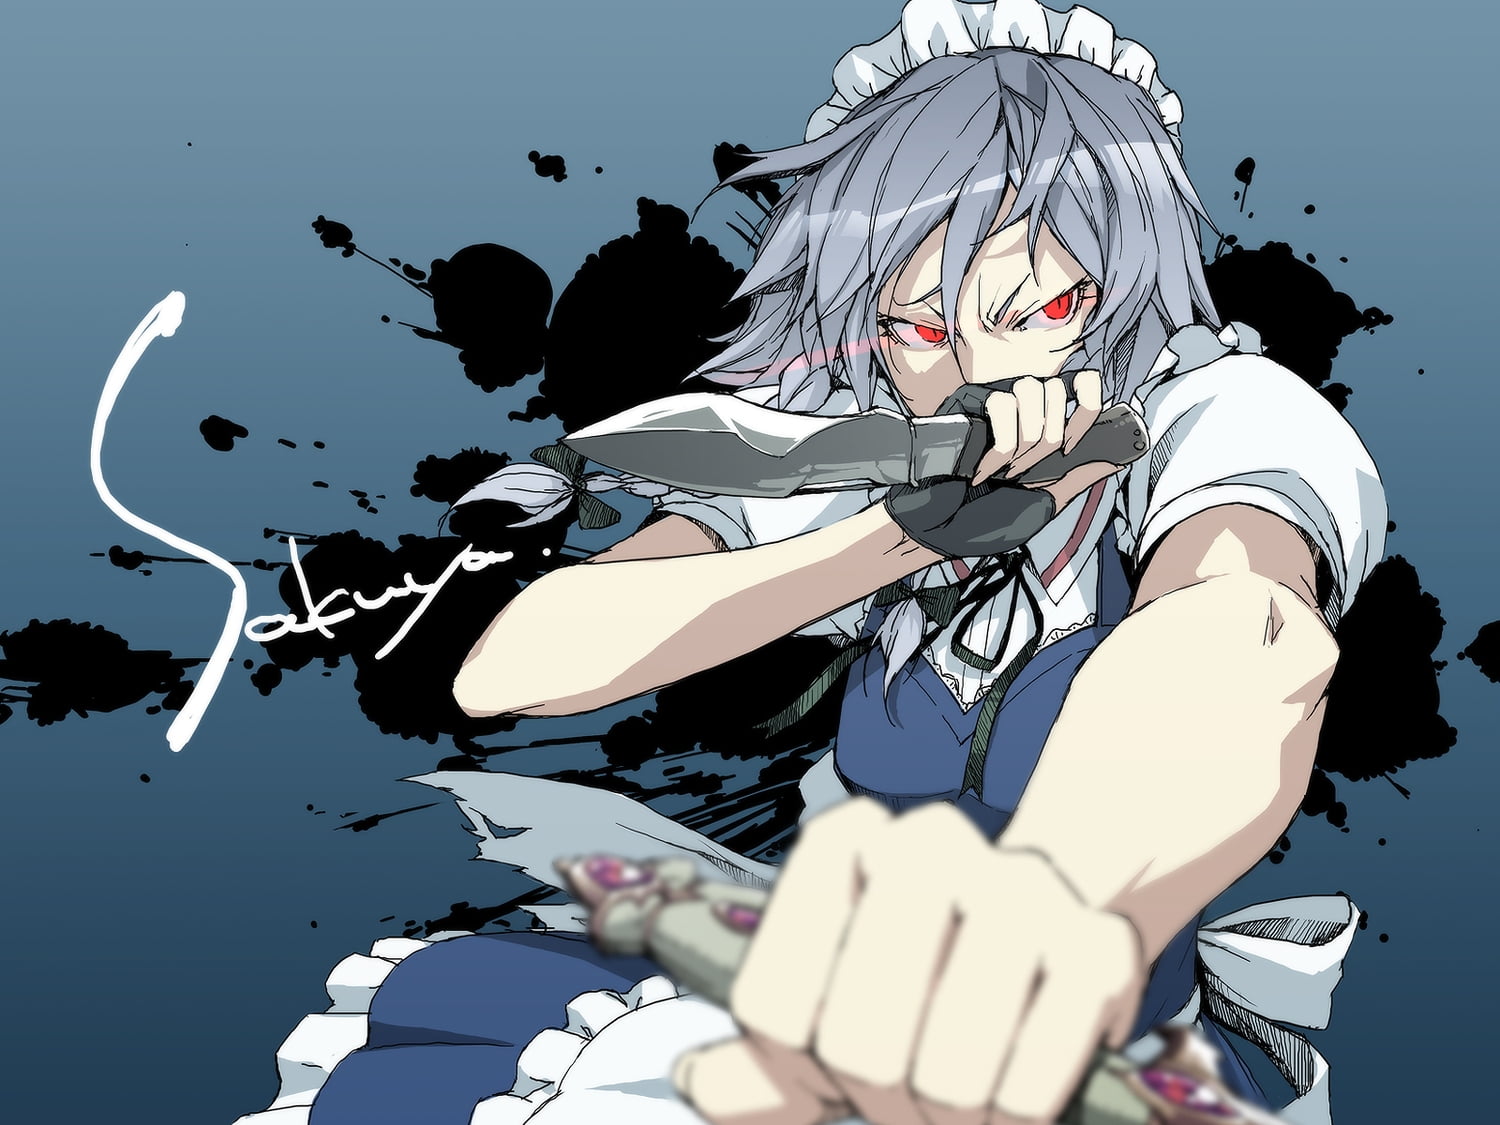 Gray Haired Red Eyed Female Anime Character Holding Knife Hd Images, Photos, Reviews